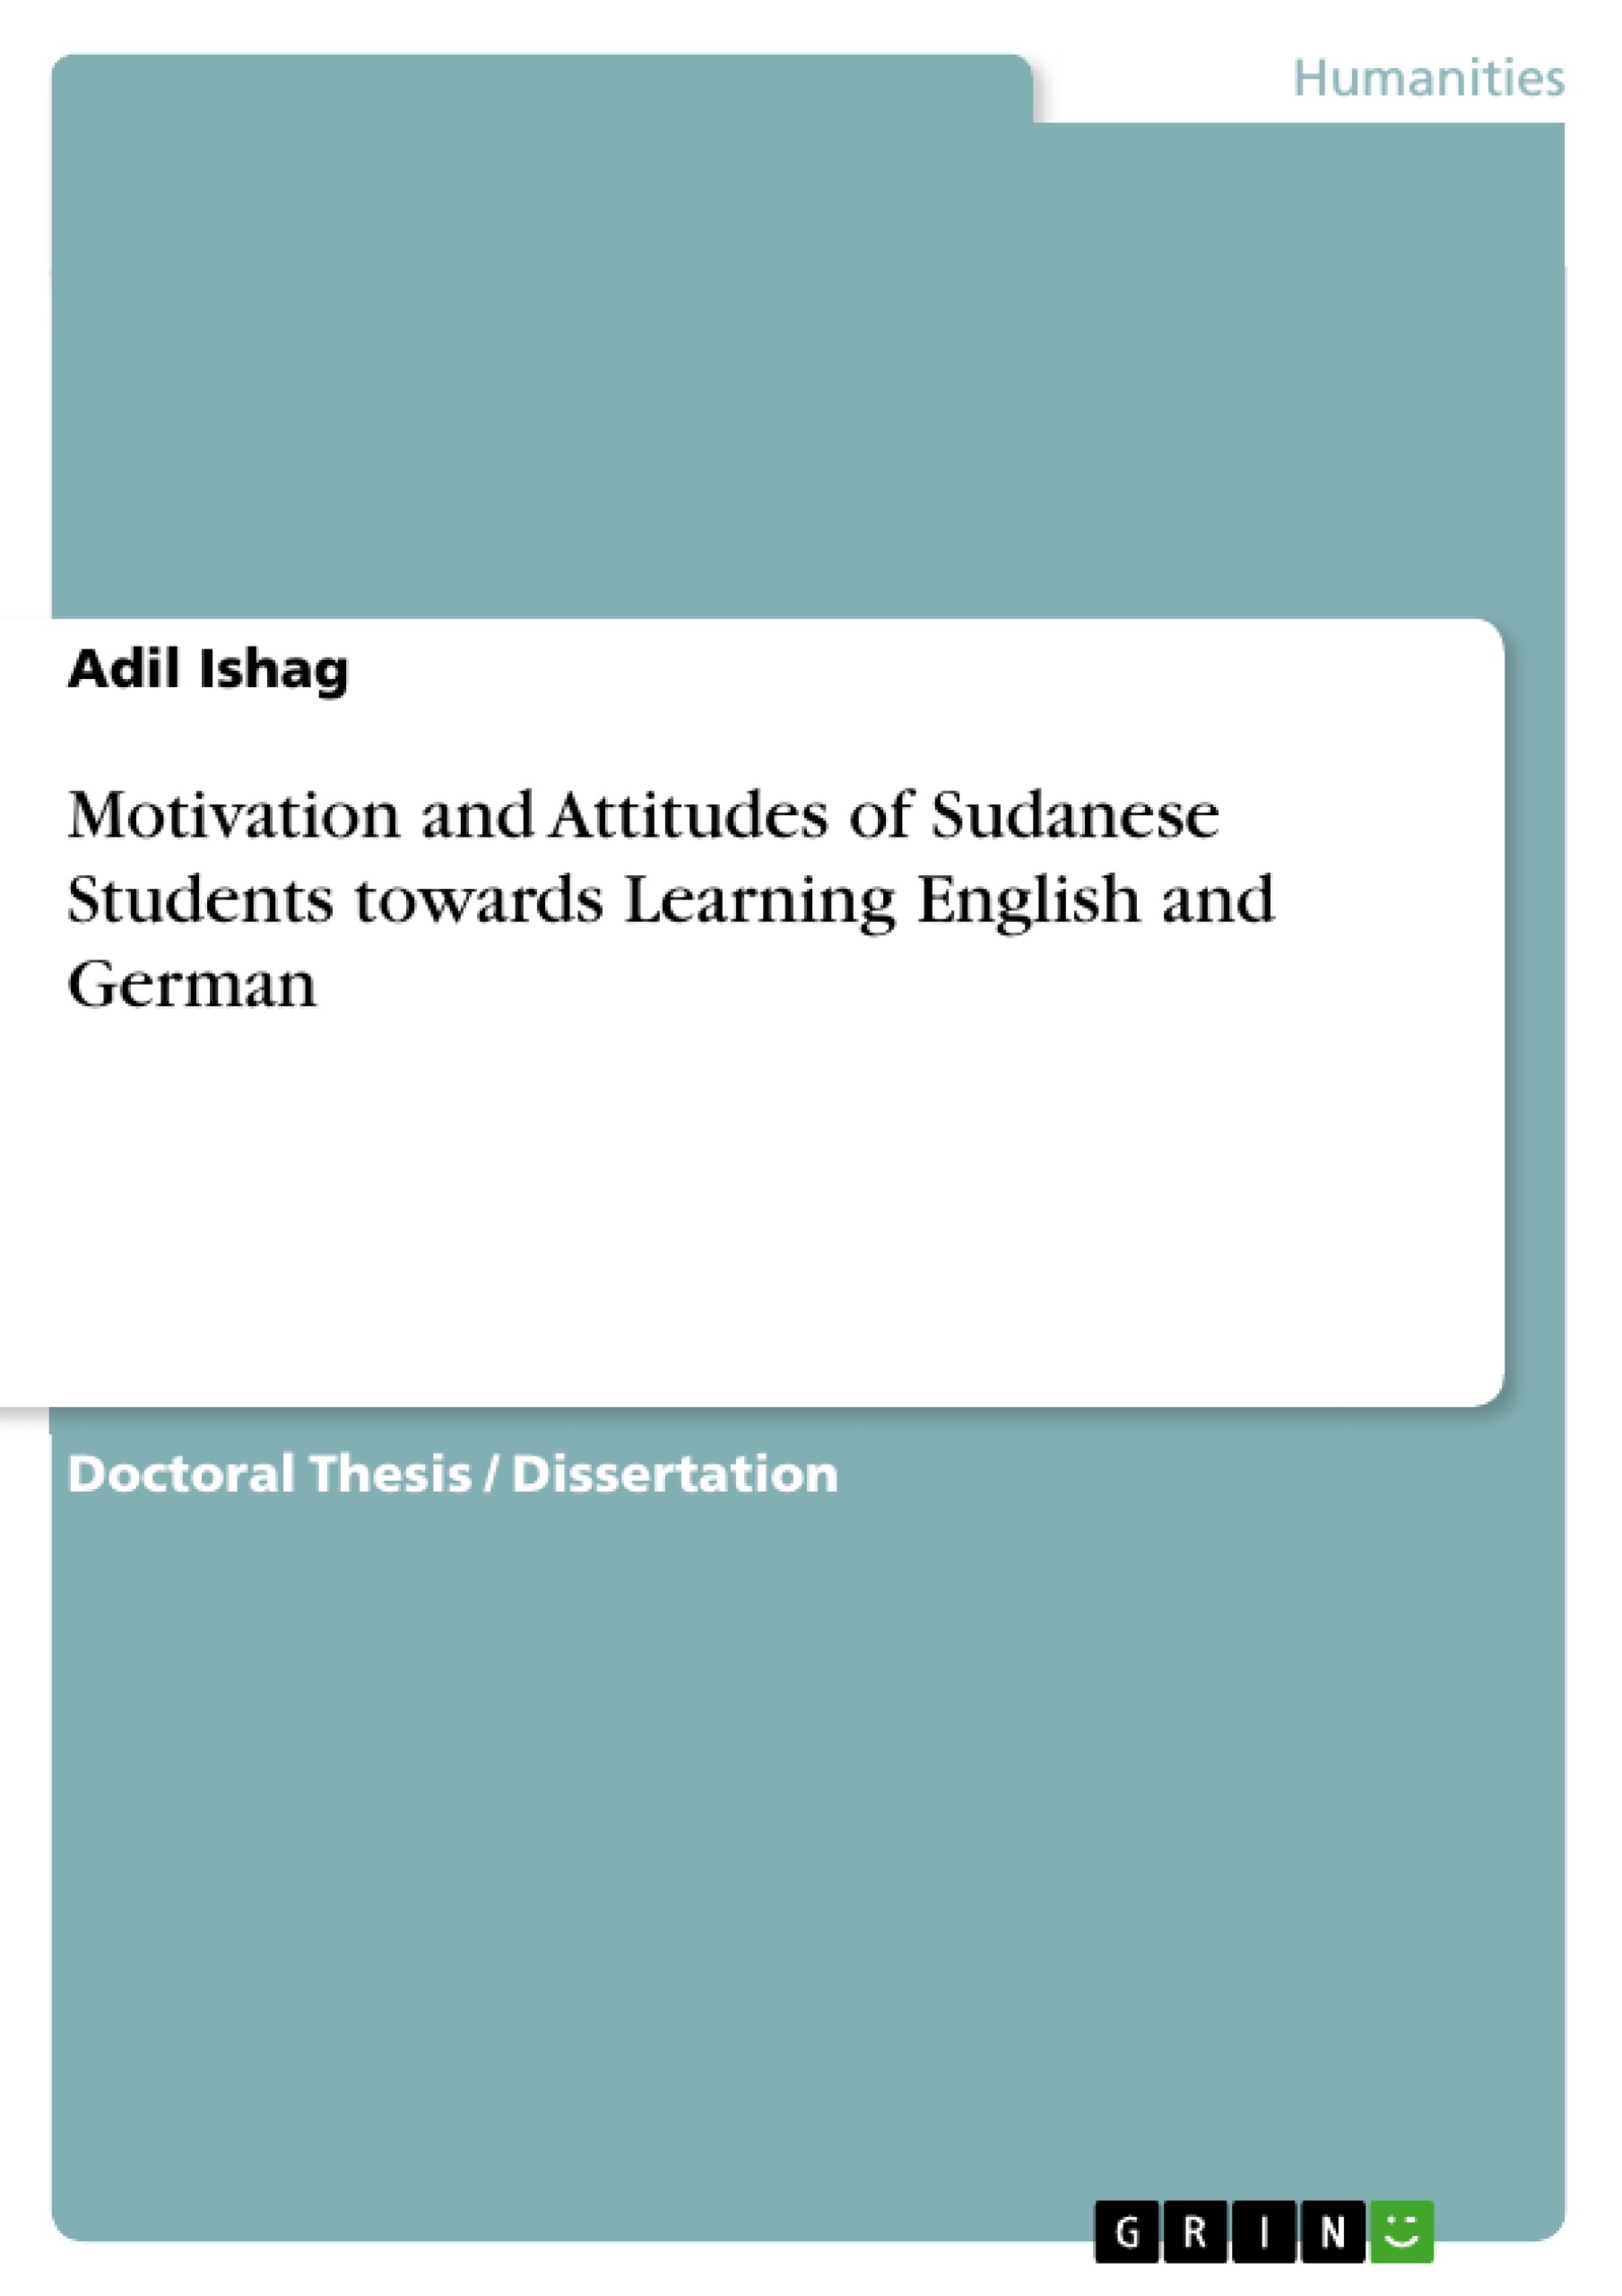 Title: Motivation and Attitudes of Sudanese Students towards Learning English and German